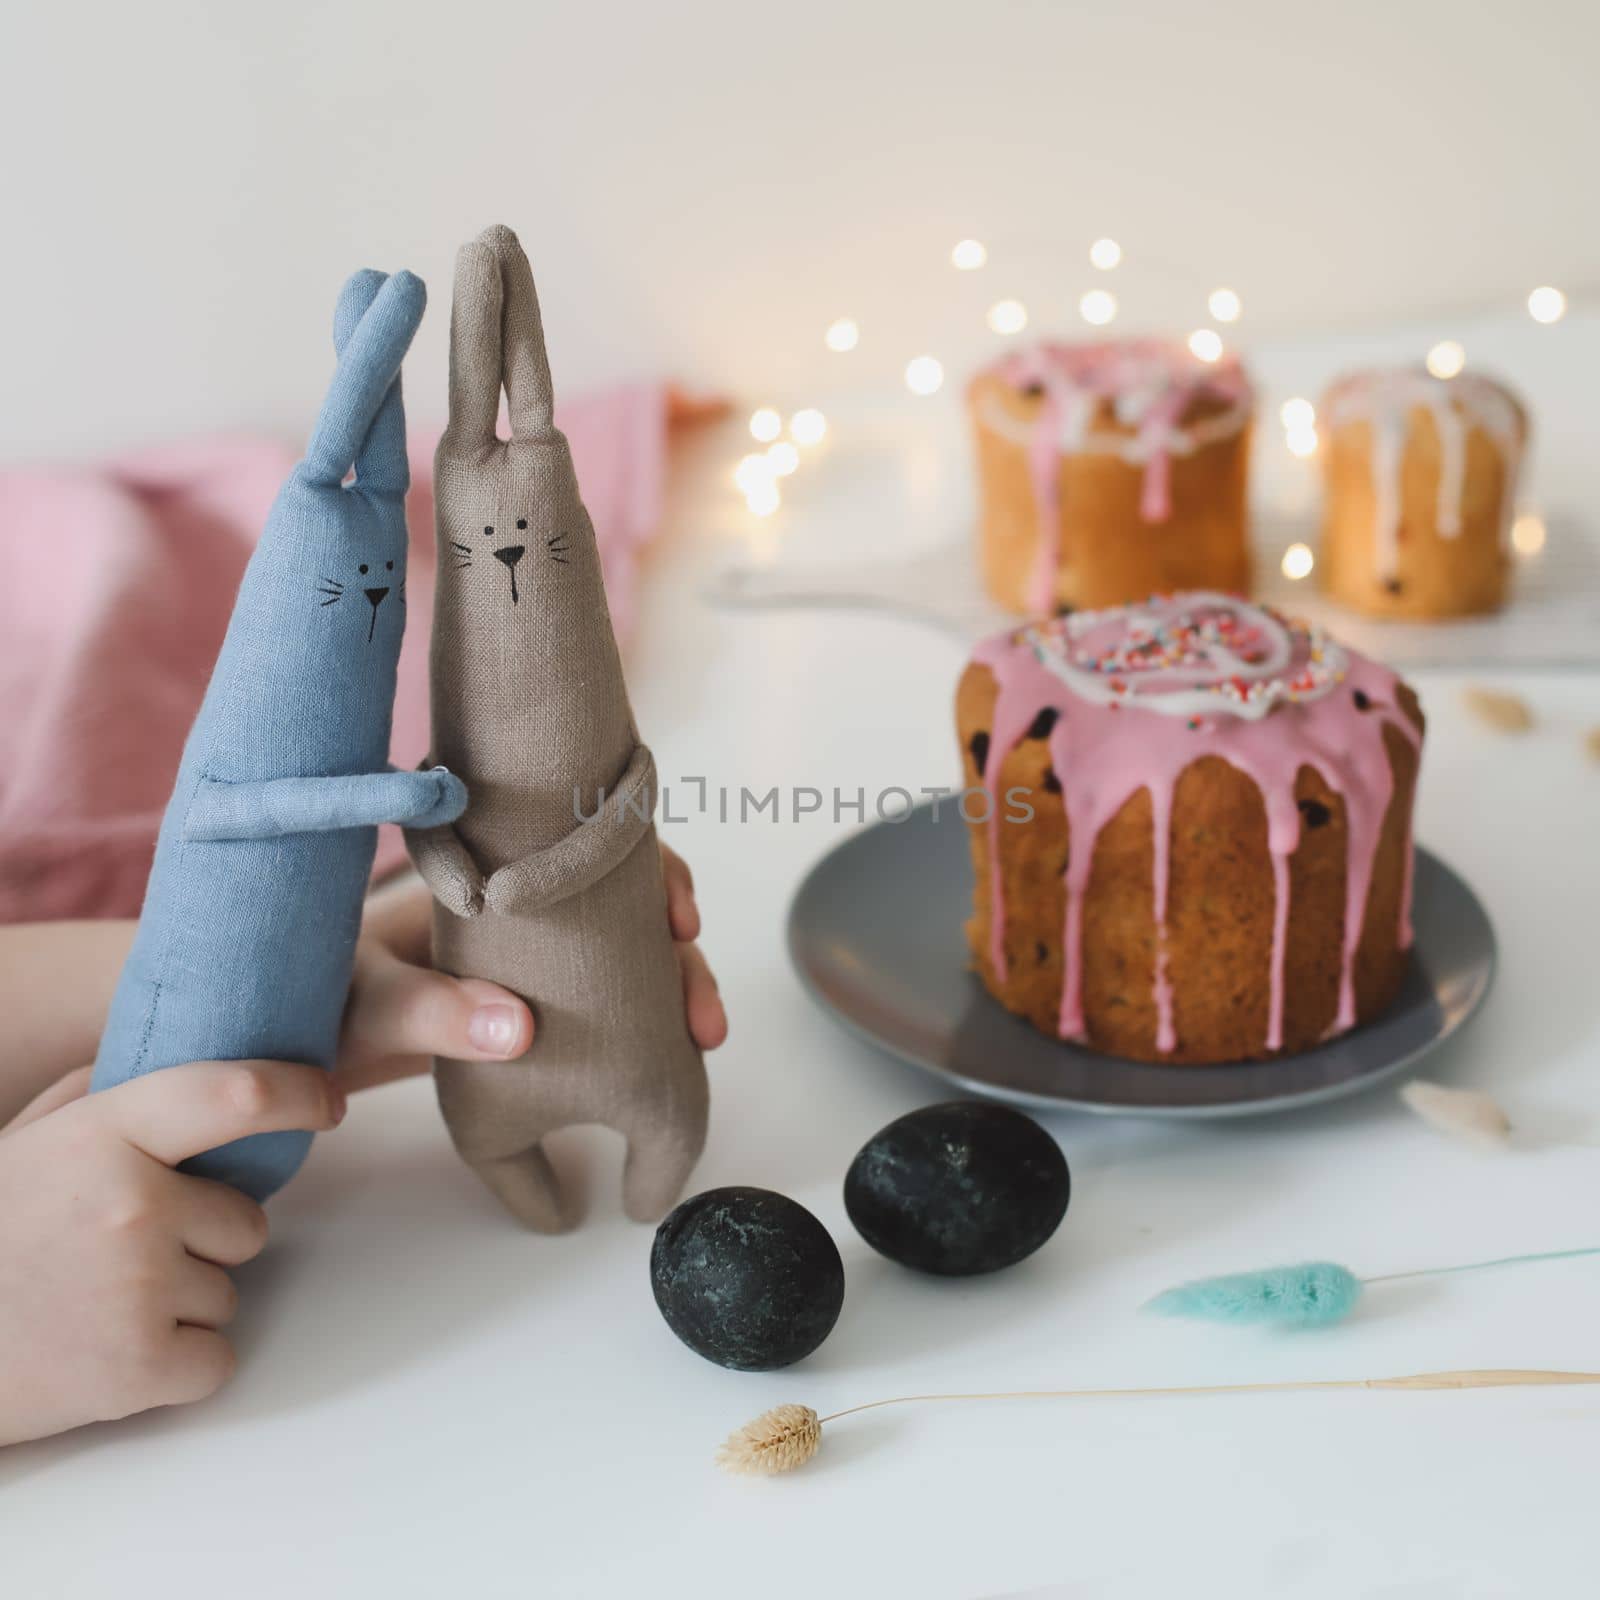 Easter cake, colorful eggs and rabbit toy. Happy Easter holiday concept. festive spring season by paralisart